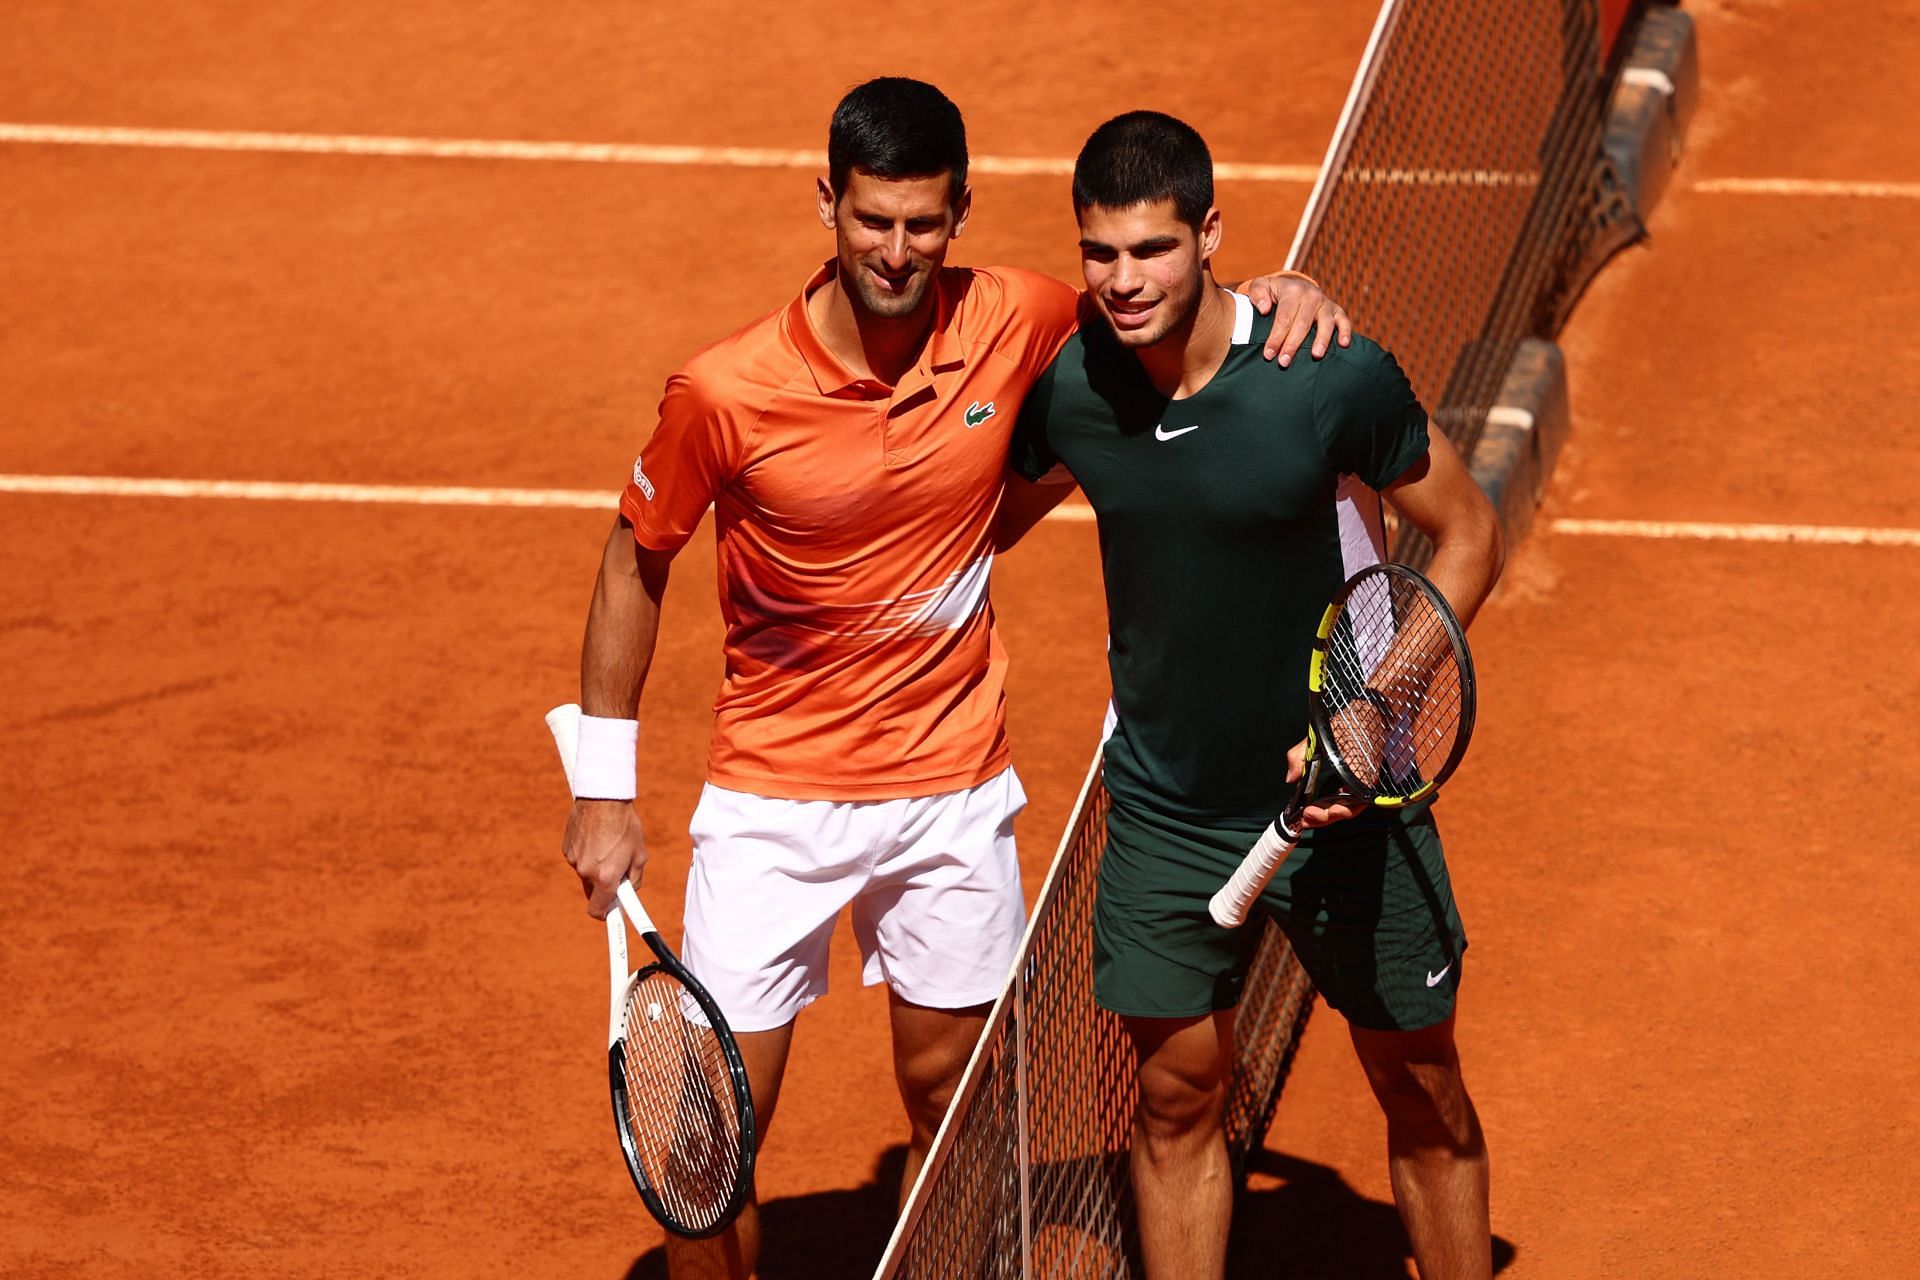 The presenter believes Djokovic-Alcaraz rivalry would be one to watch in the coming years